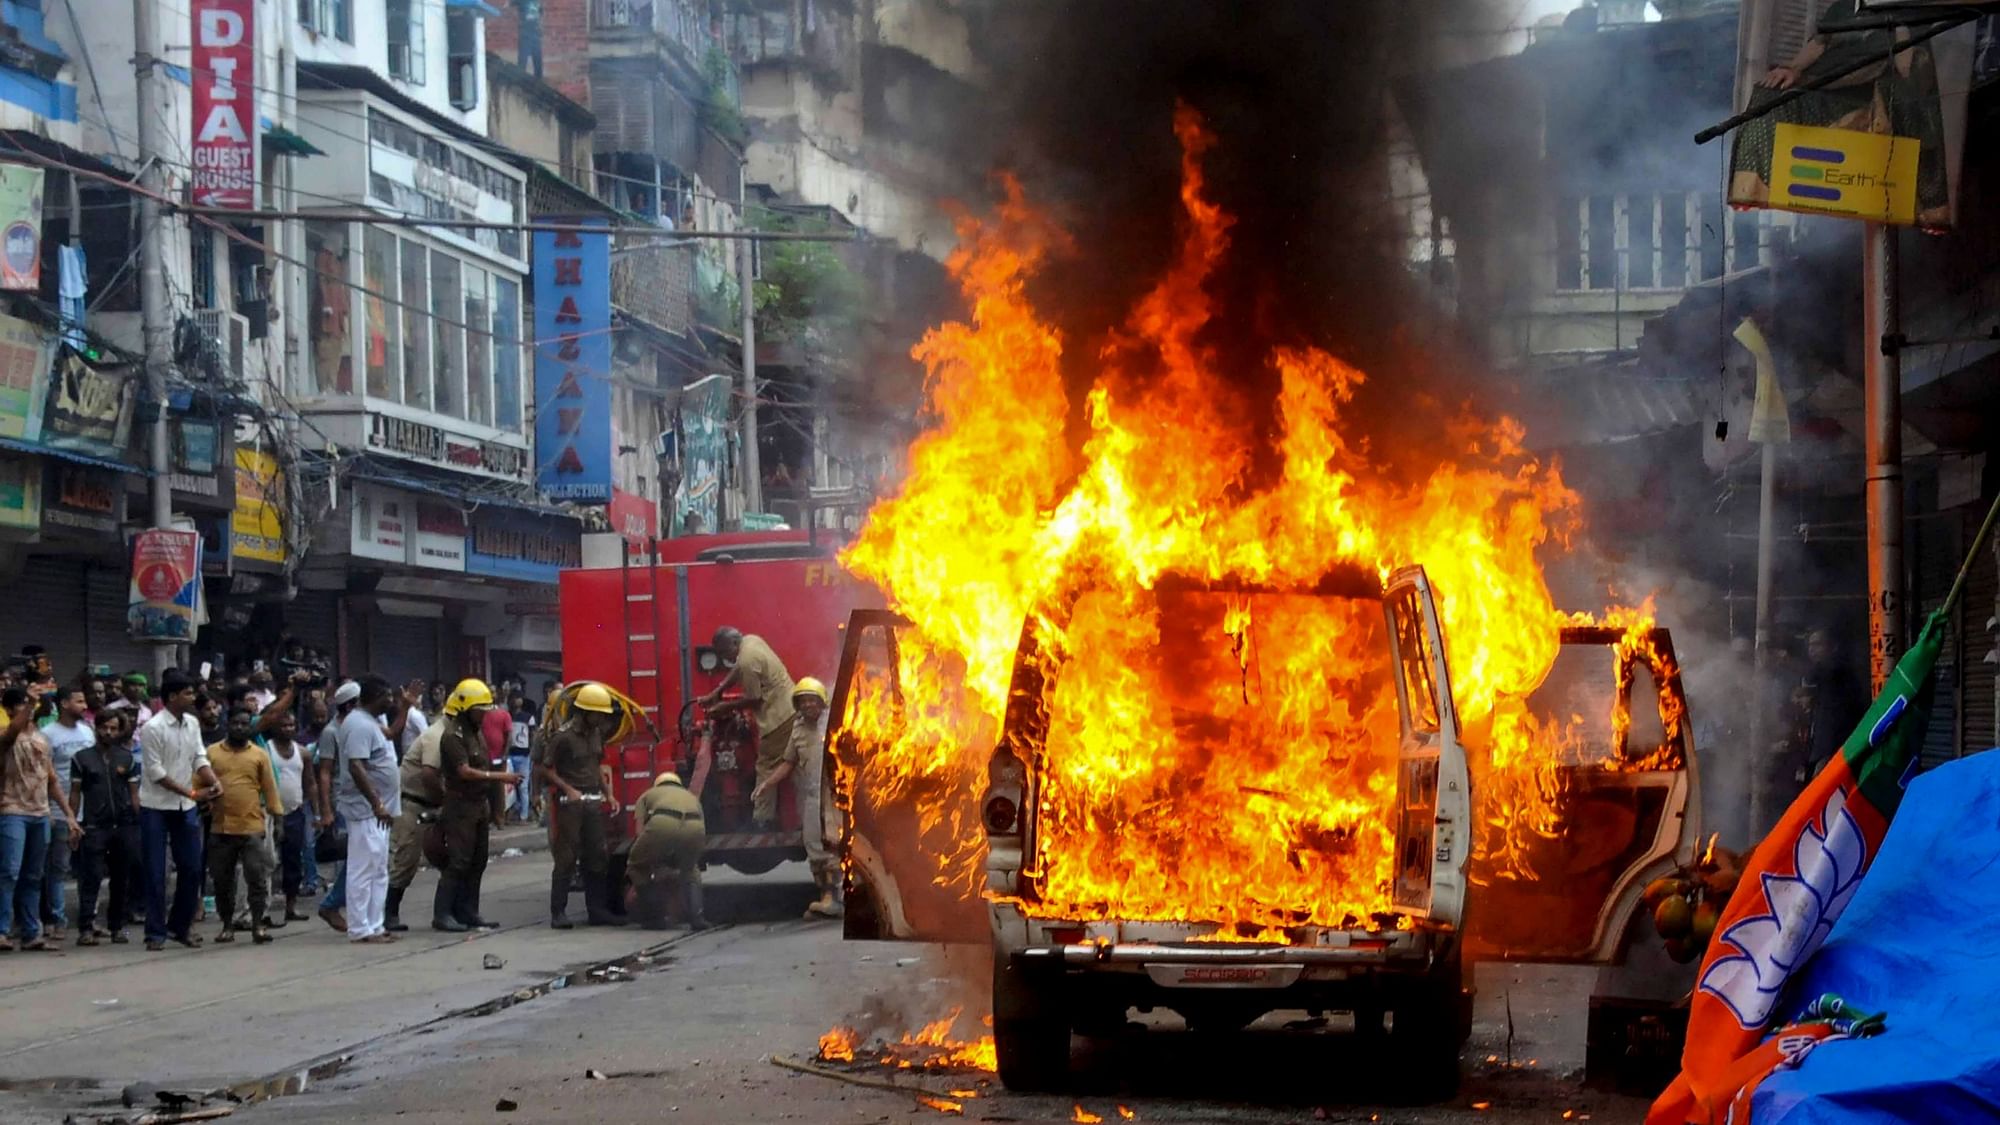 <div class="paragraphs"><p>A police vehicle was set on fire by some miscreants near Nakhoda Mosque in Kolkata on Tuesday, 13 September 2022.</p></div>